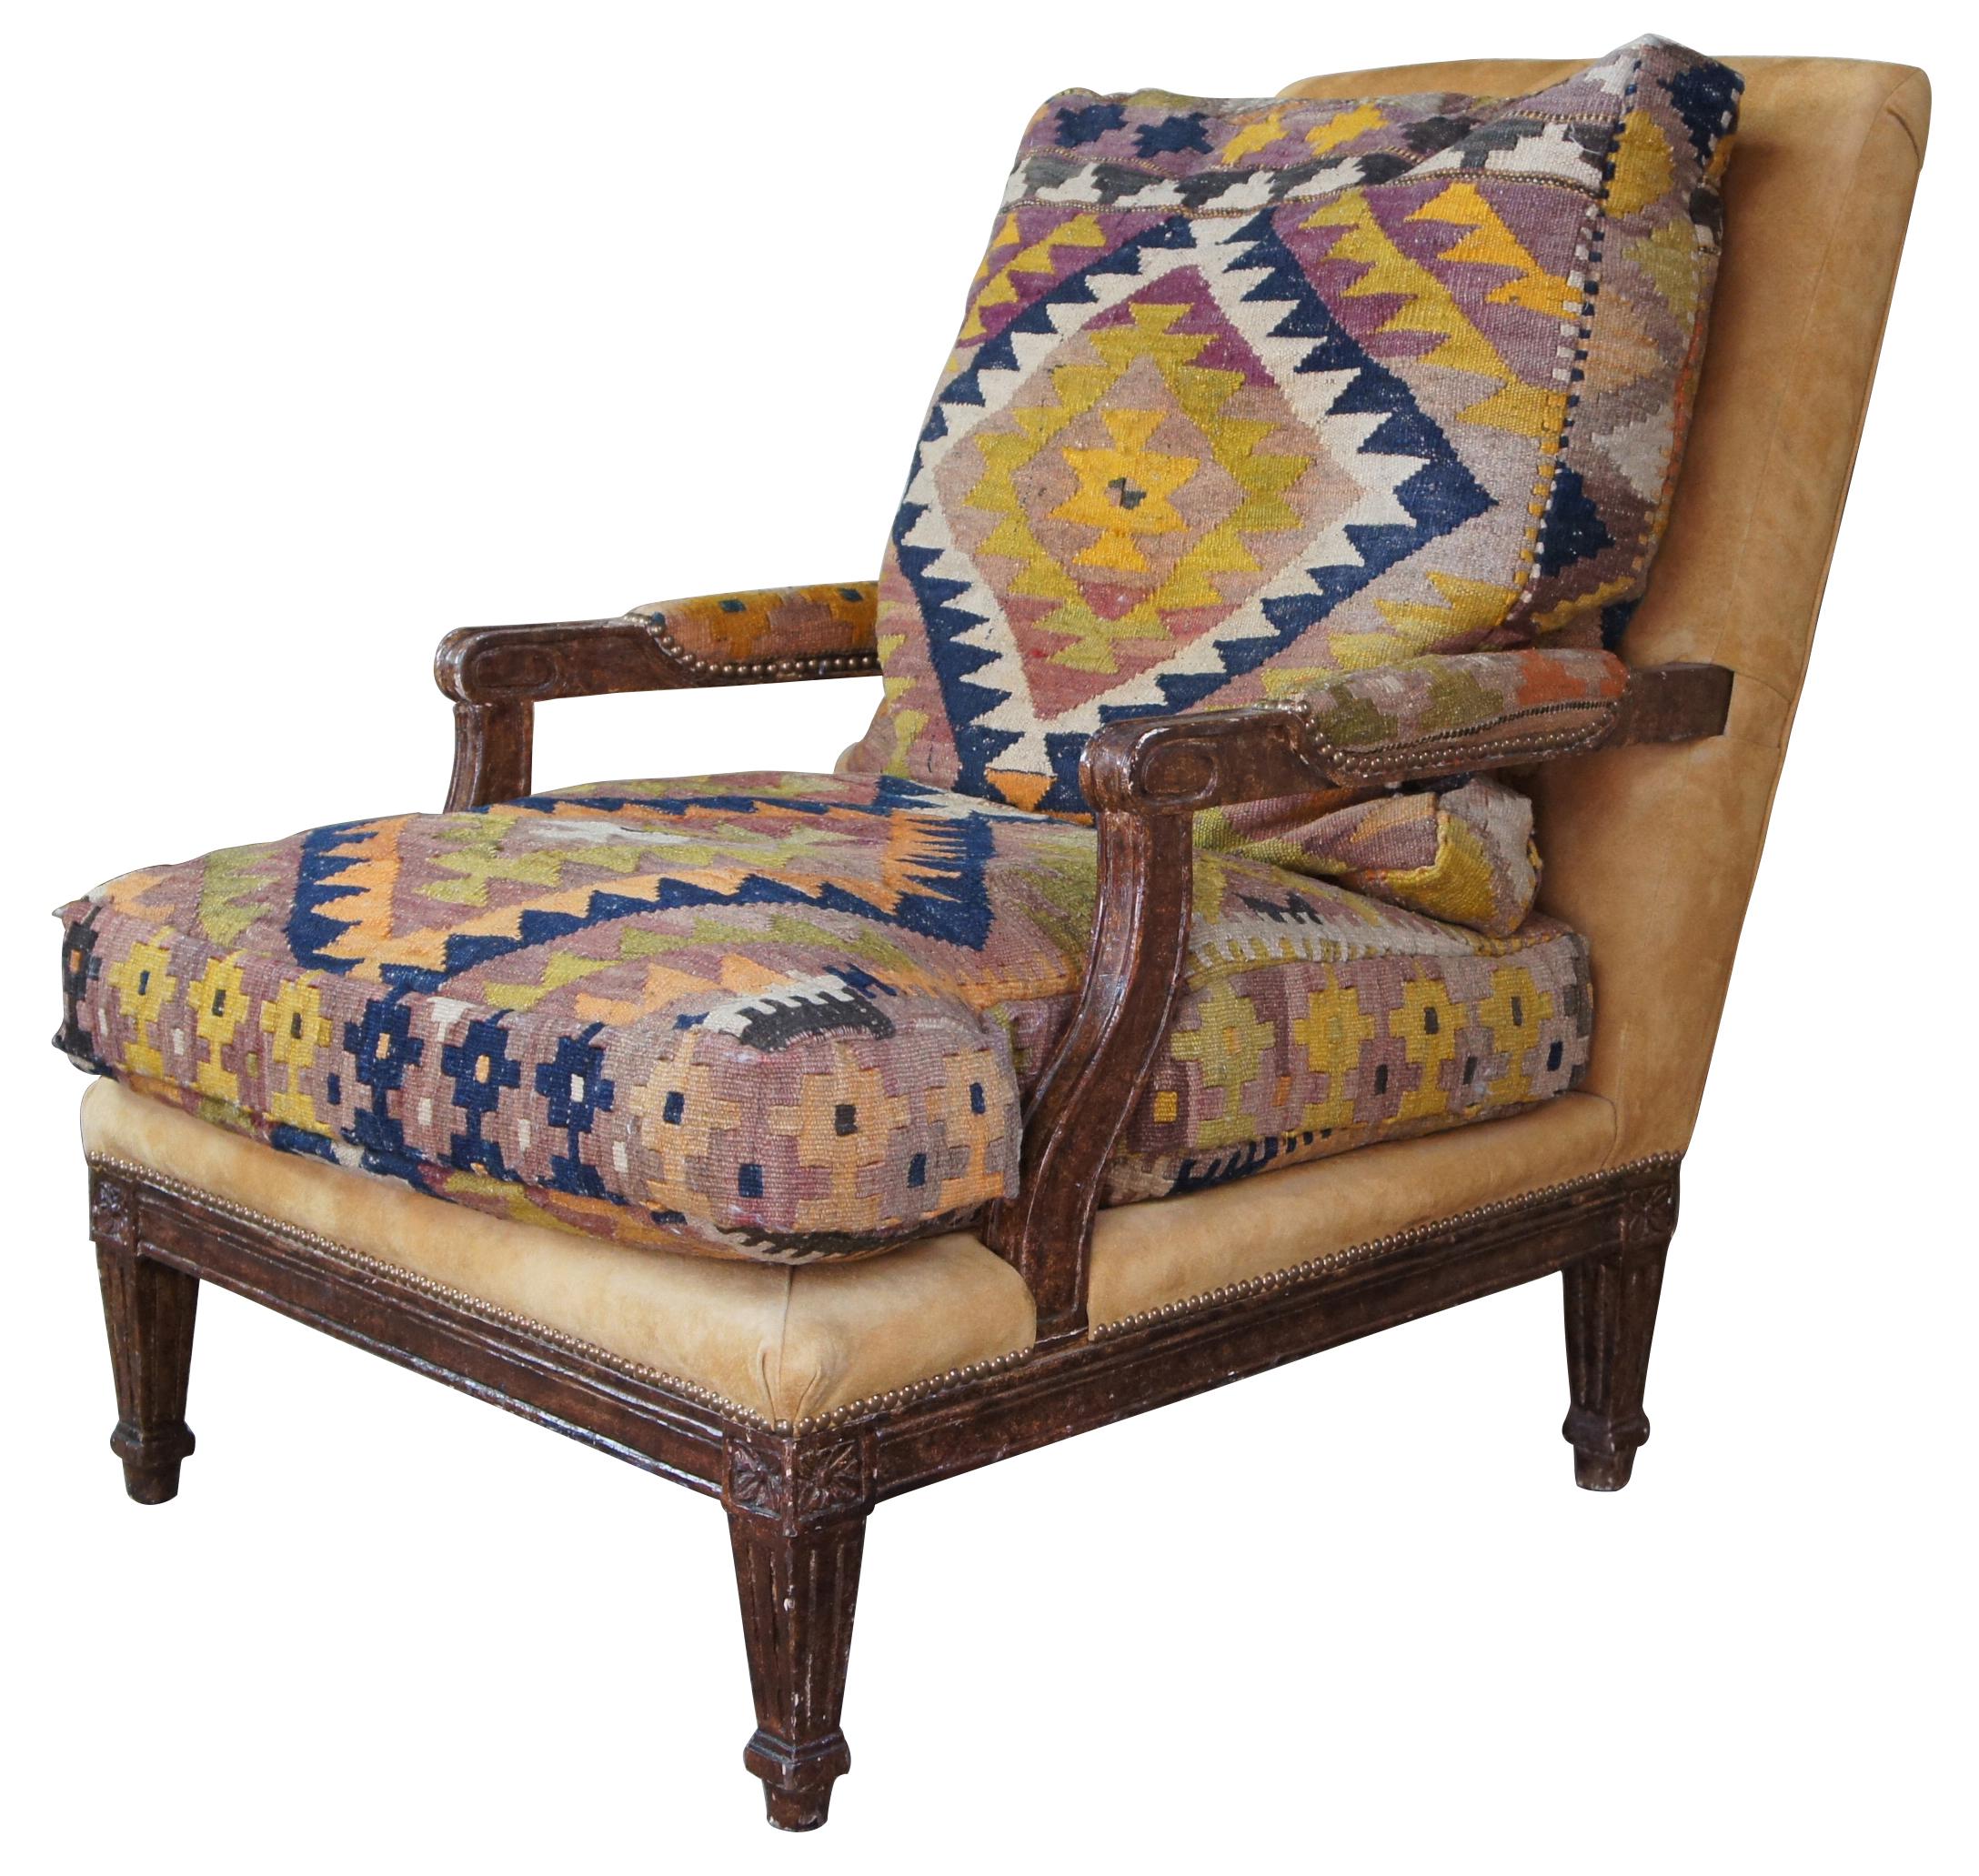 Louis XV style faux finished armchair. Features southwestern tapestry seat and pillow with suede backing/accents. A very comfortable and stylish lounger. Made for Design Source, Beverly Interiors (Stewart Collection) for Wiseman & Gale Interiors in